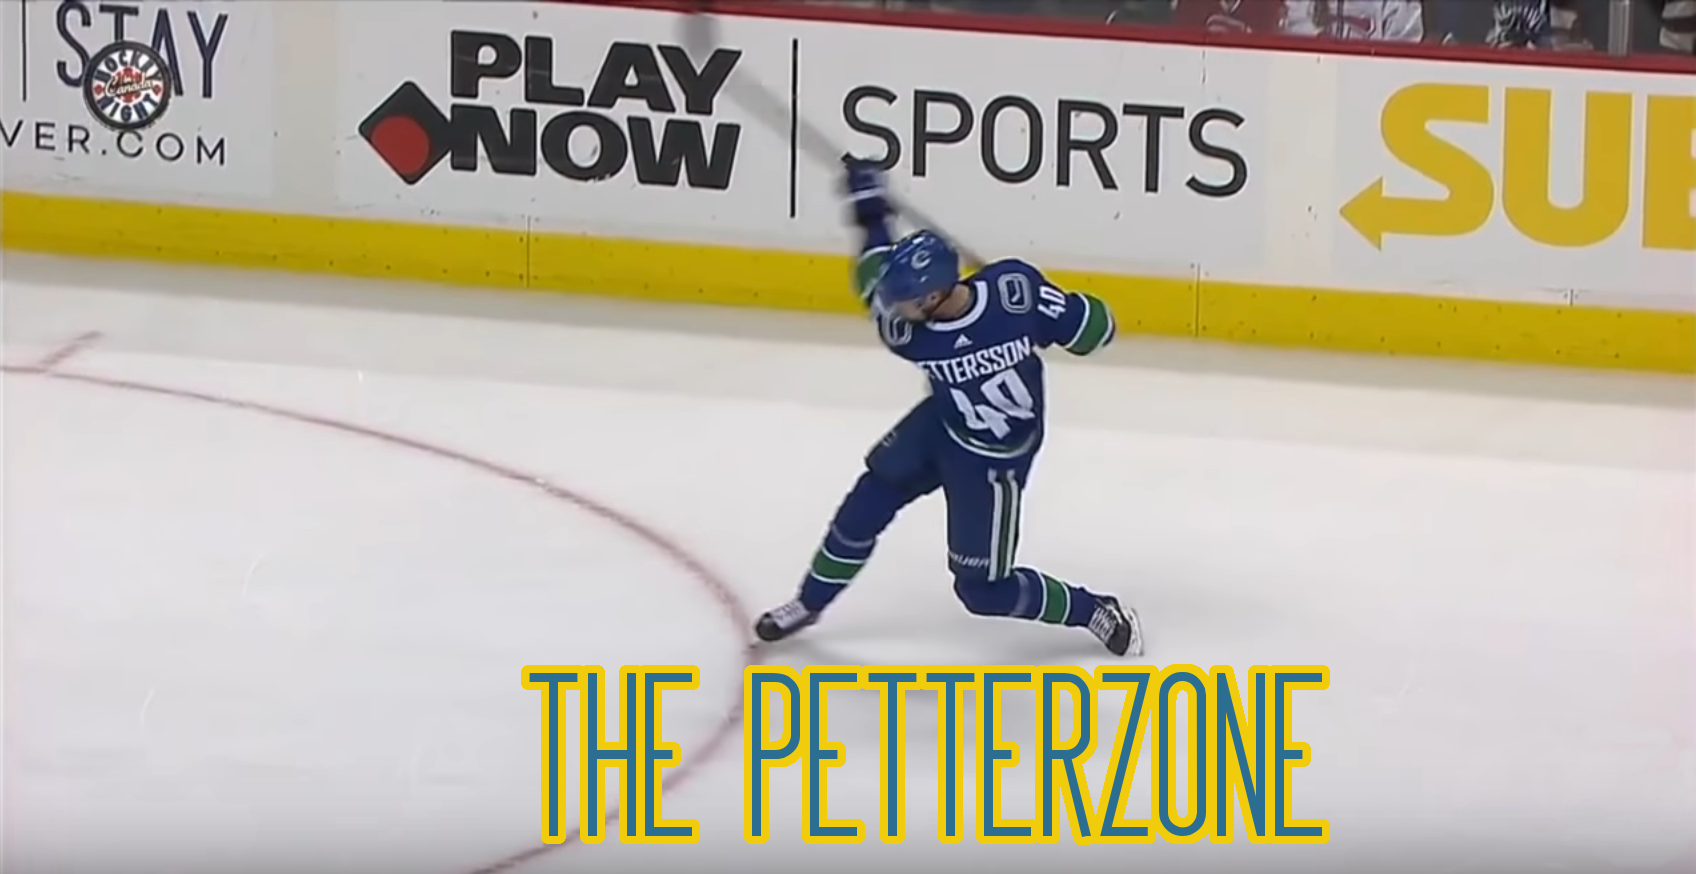 Elias Pettersson is an unreal talent, but Gretzky comparisons are unfair to  everyone involved - The Athletic